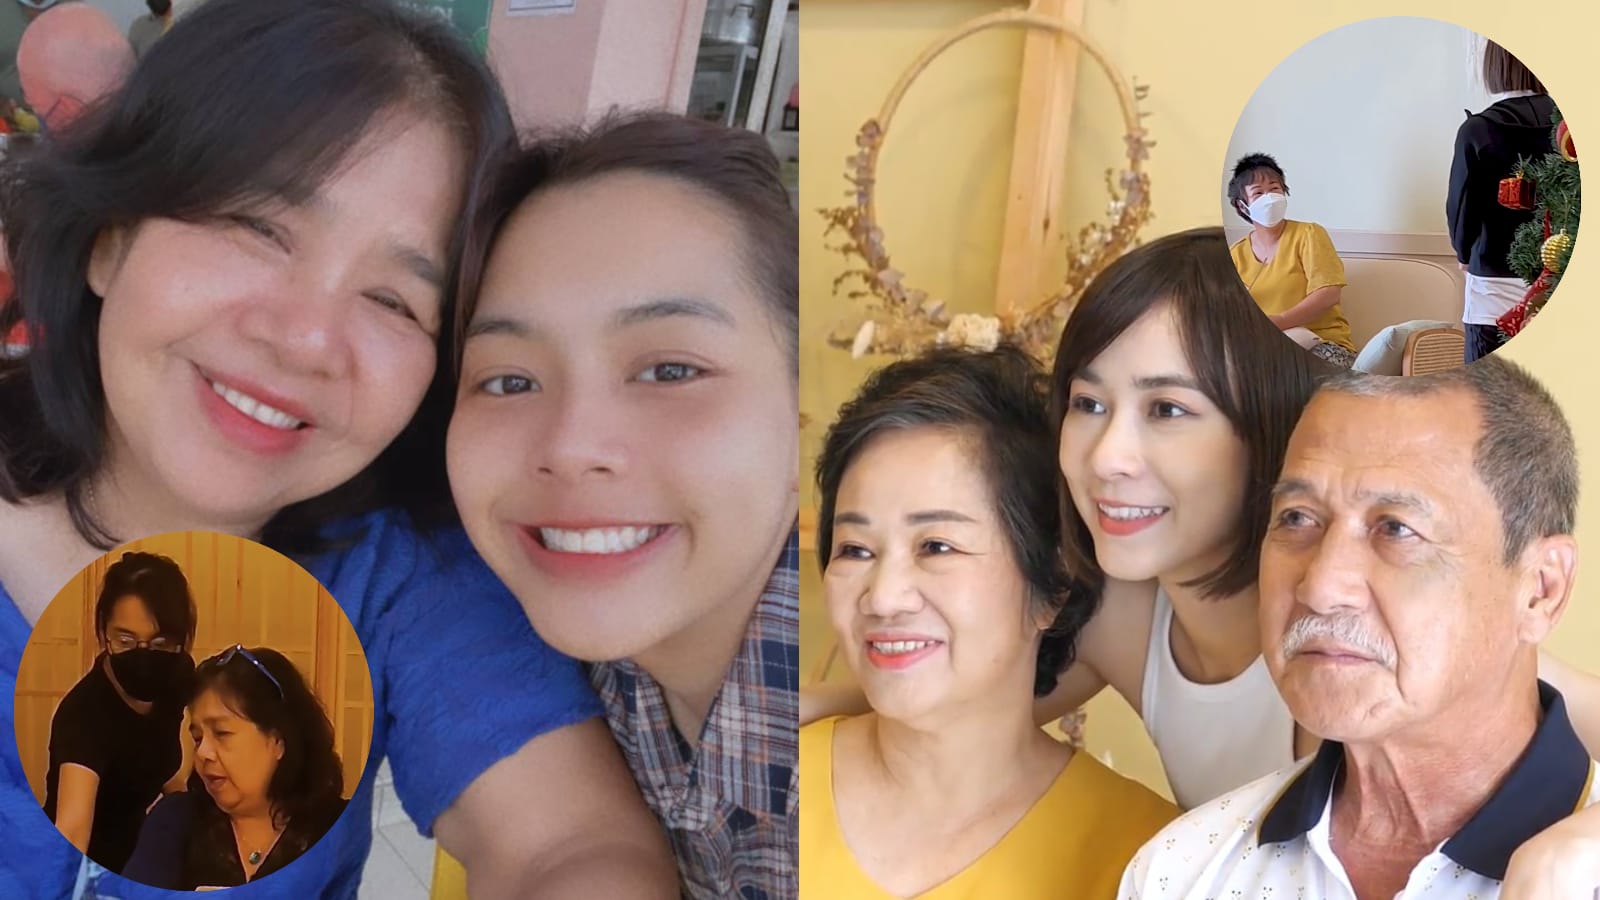 The Mums Of Seow Sin Nee & Juin Teh Didn’t Recognise Them When They Went Back To M’sia As A Surprise After Being Away For 2 Years